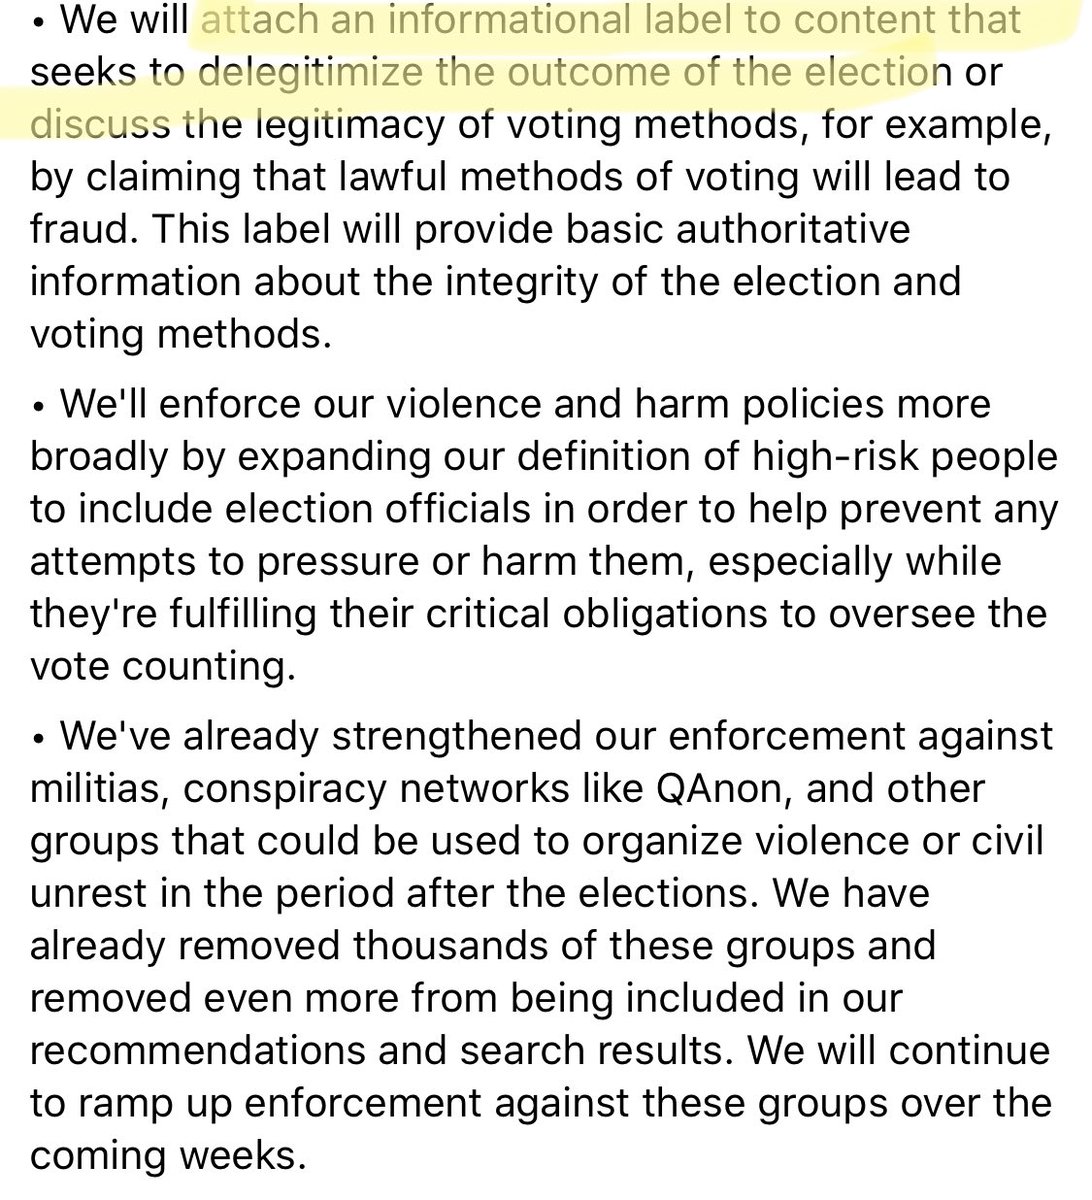 Facebook will add a label to content that seeks to delegitimize the outcome of the election or legitimacy of voting methods.I’d like to see it; will they use red? Mask the post or limit reach, like  @Twitter?TBD how successful Facebook will be limiting QAnon & militia activity